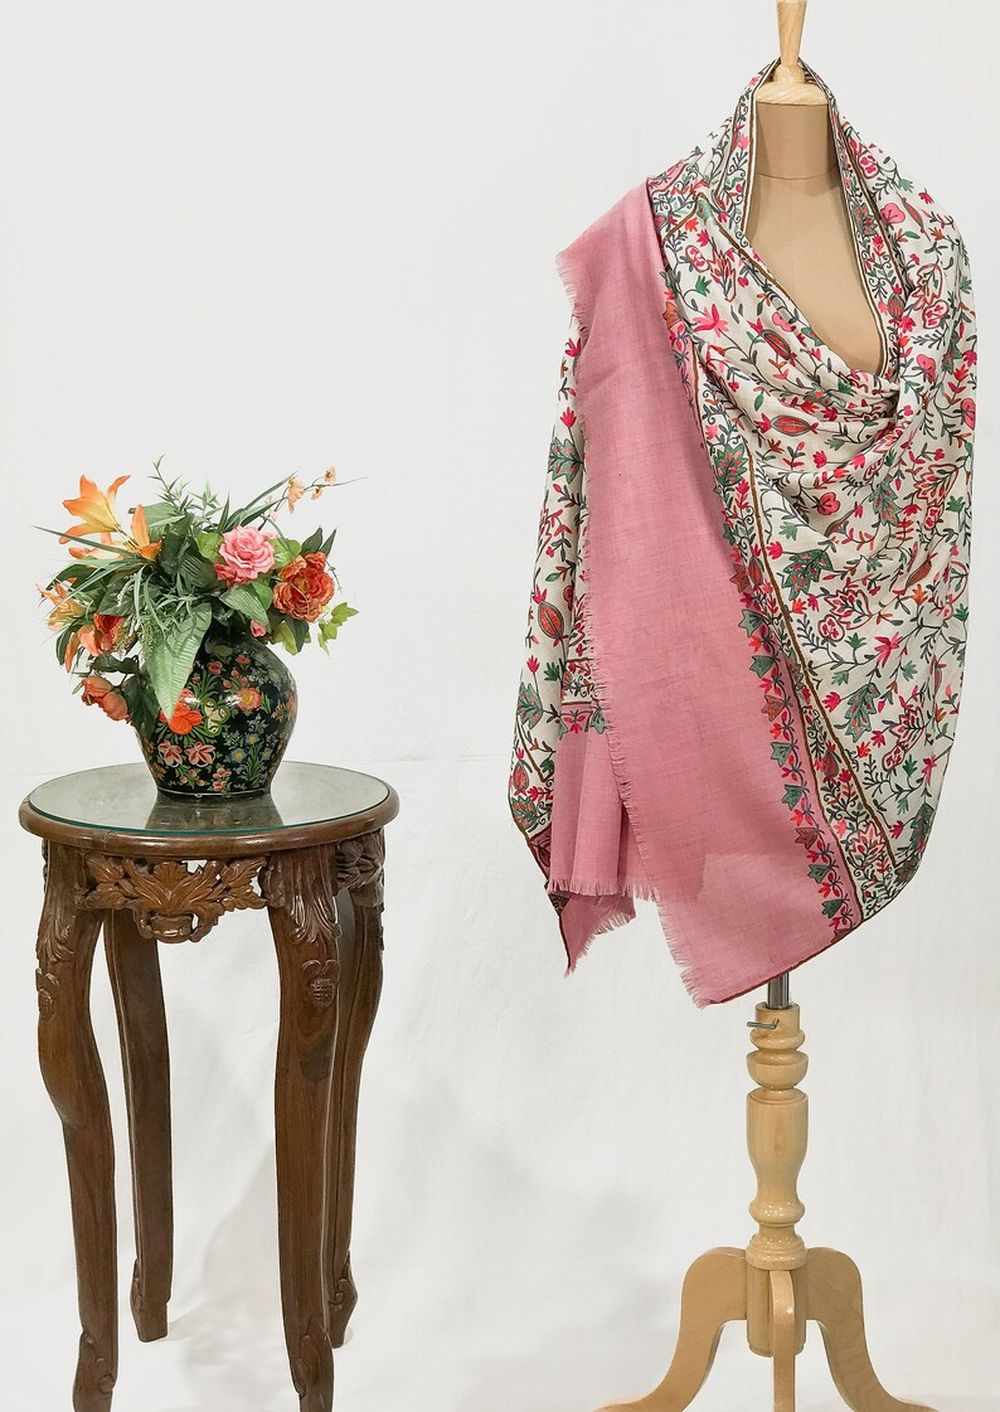 Off-White Pure Wool Shawl with Pink Palla Silk Thread Aari Jaal Embroidery